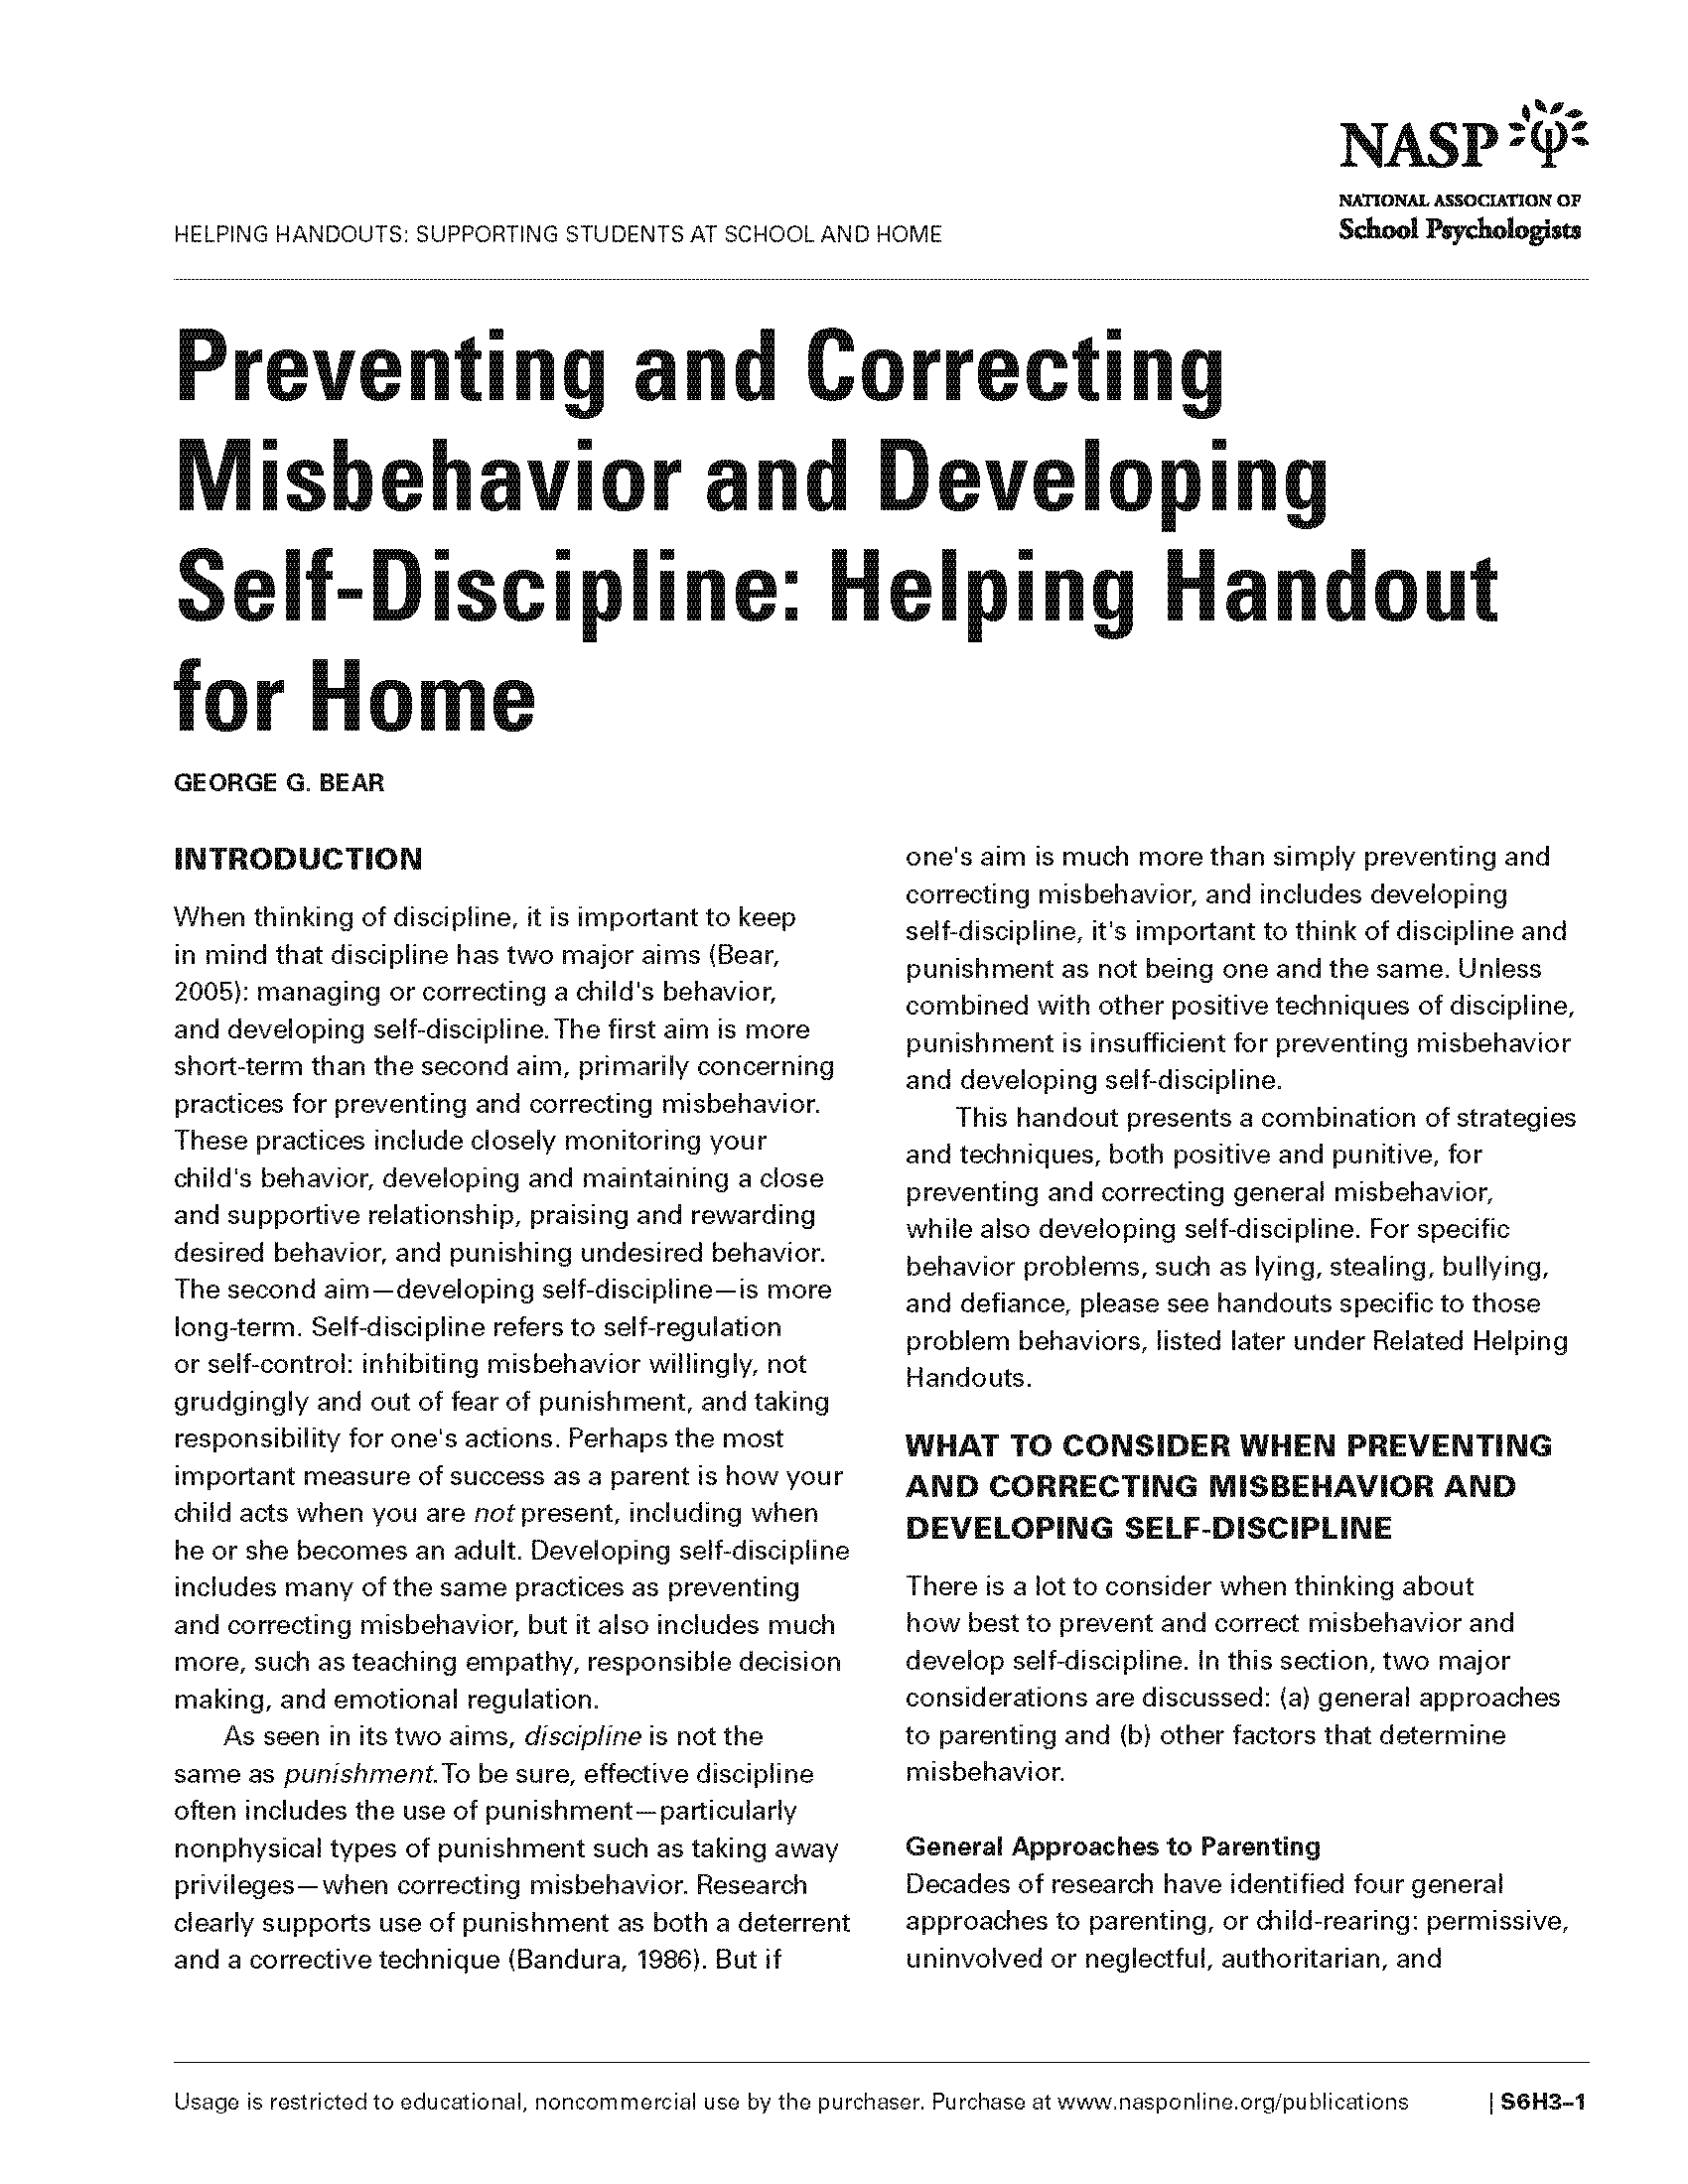 Preventing and Correcting Misbehavior and Developing Self-Discipline: Helping Handout for Home